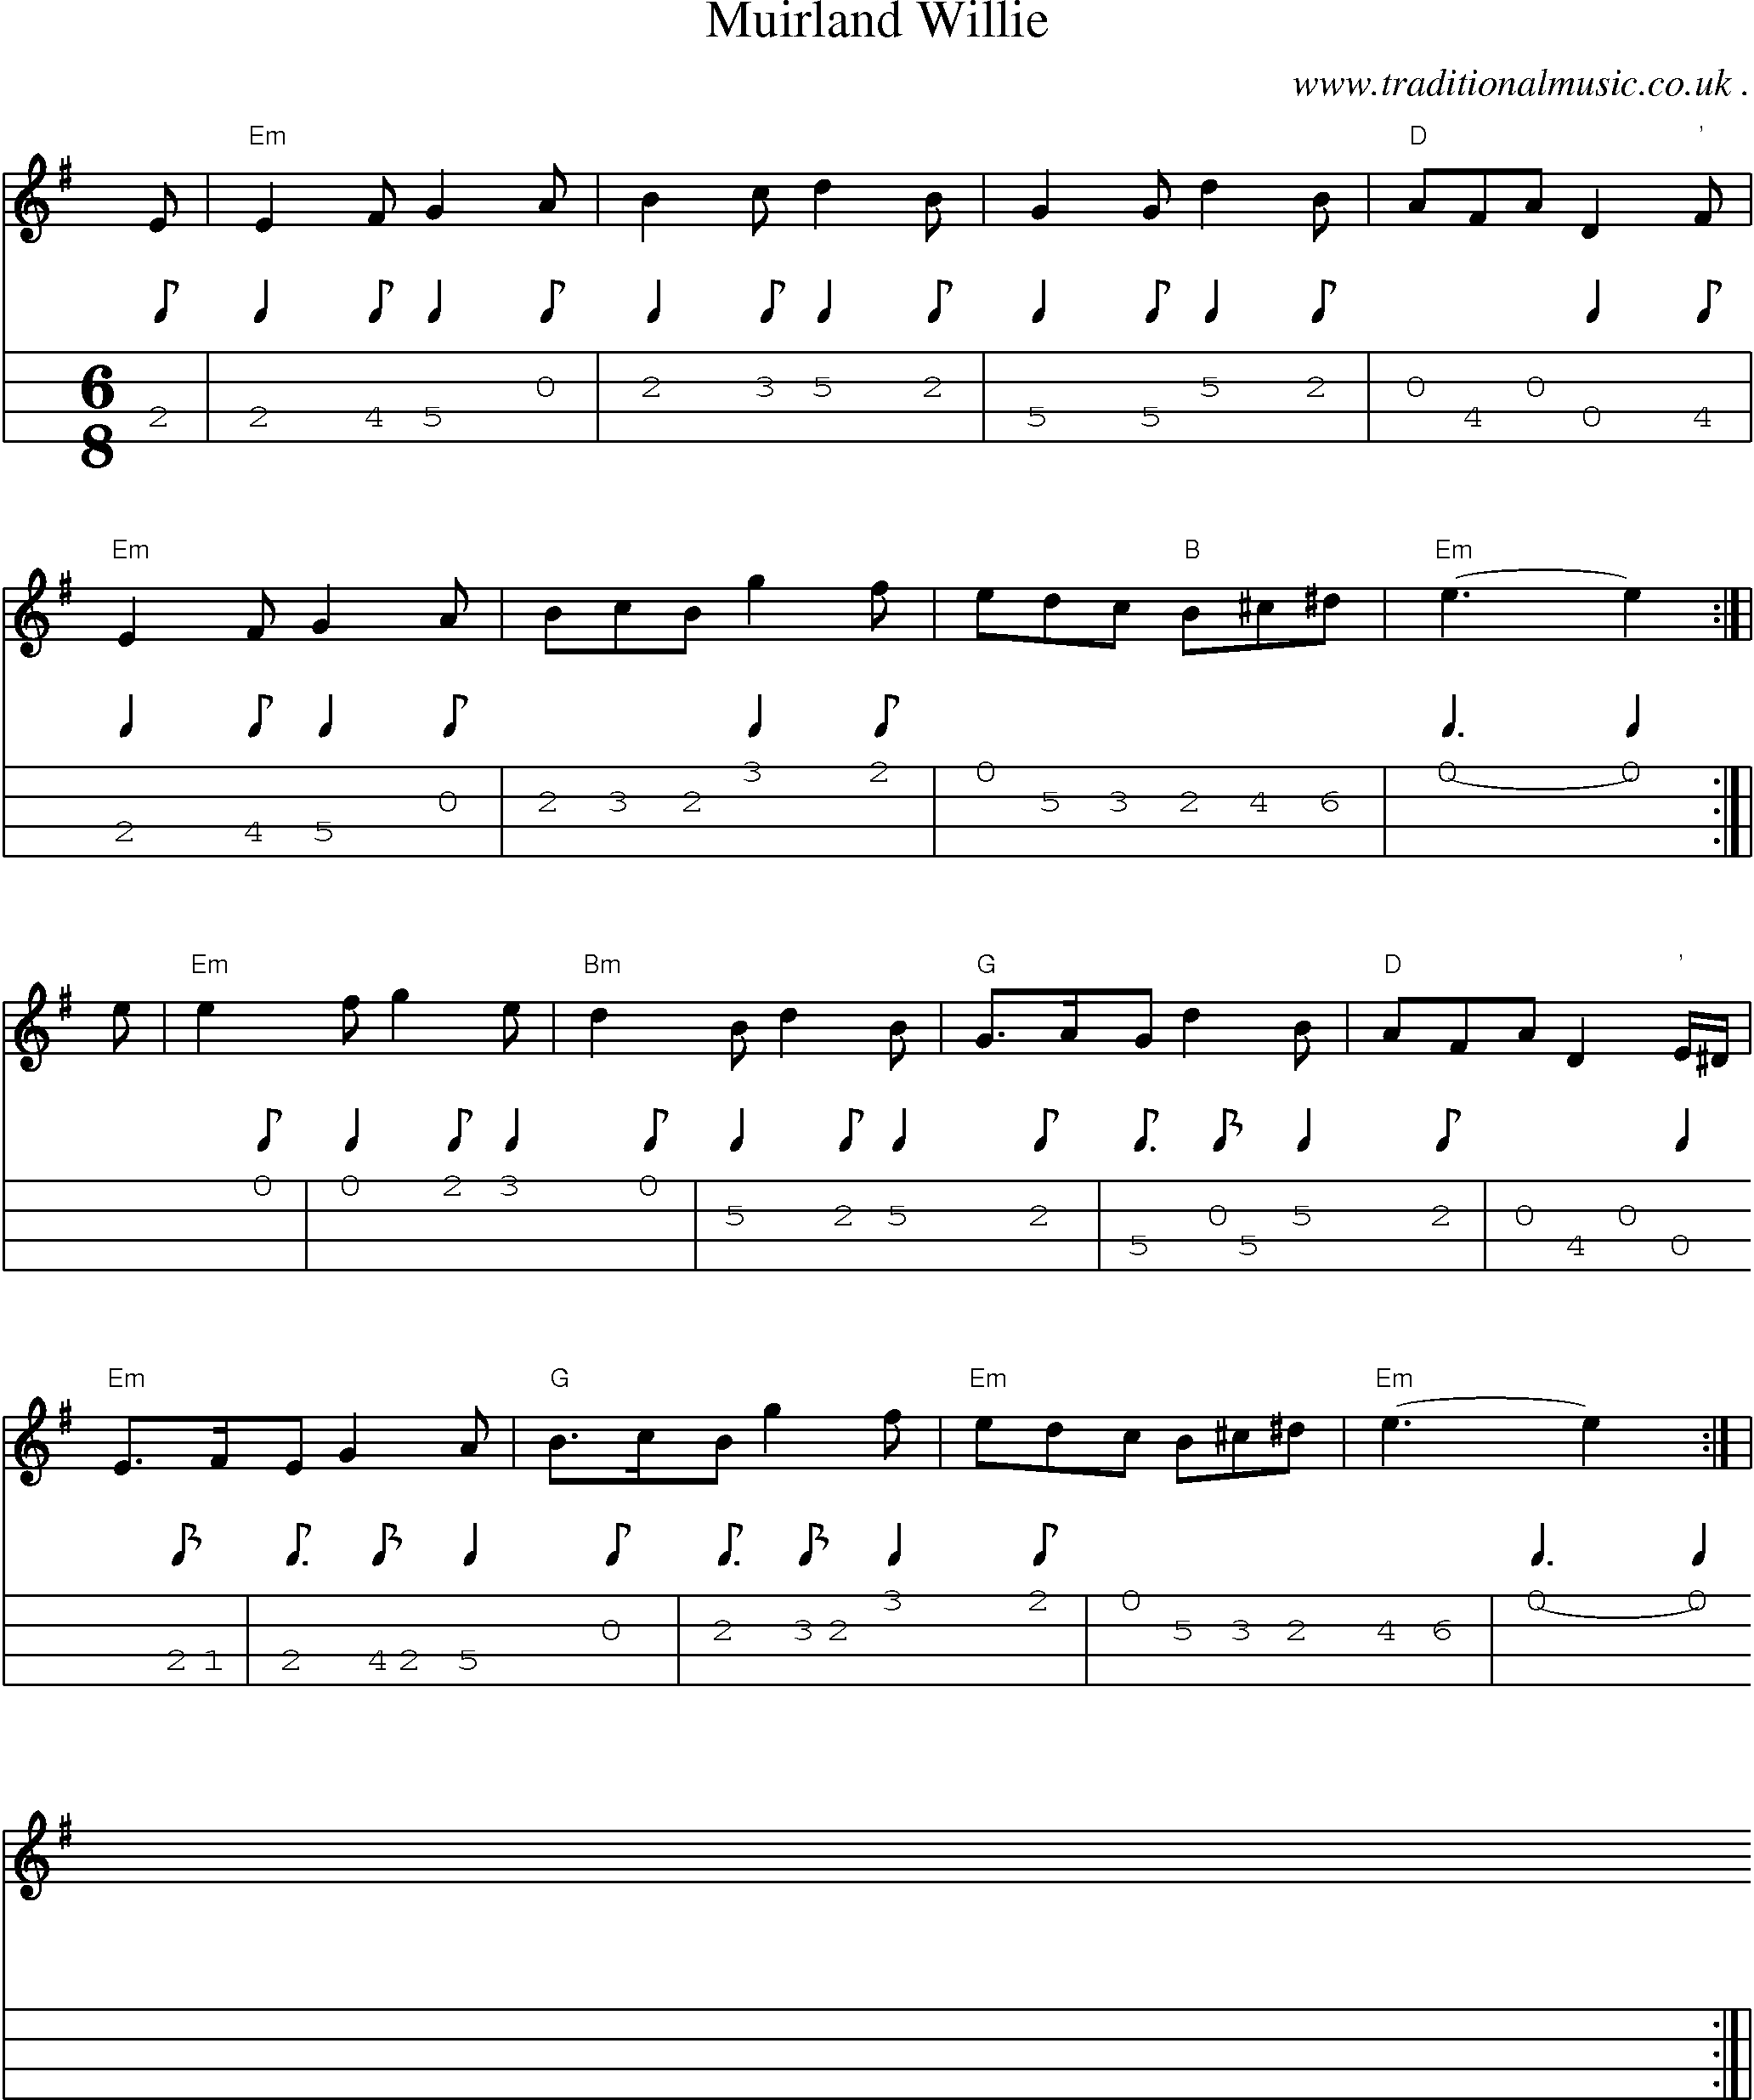 Sheet-music  score, Chords and Mandolin Tabs for Muirland Willie